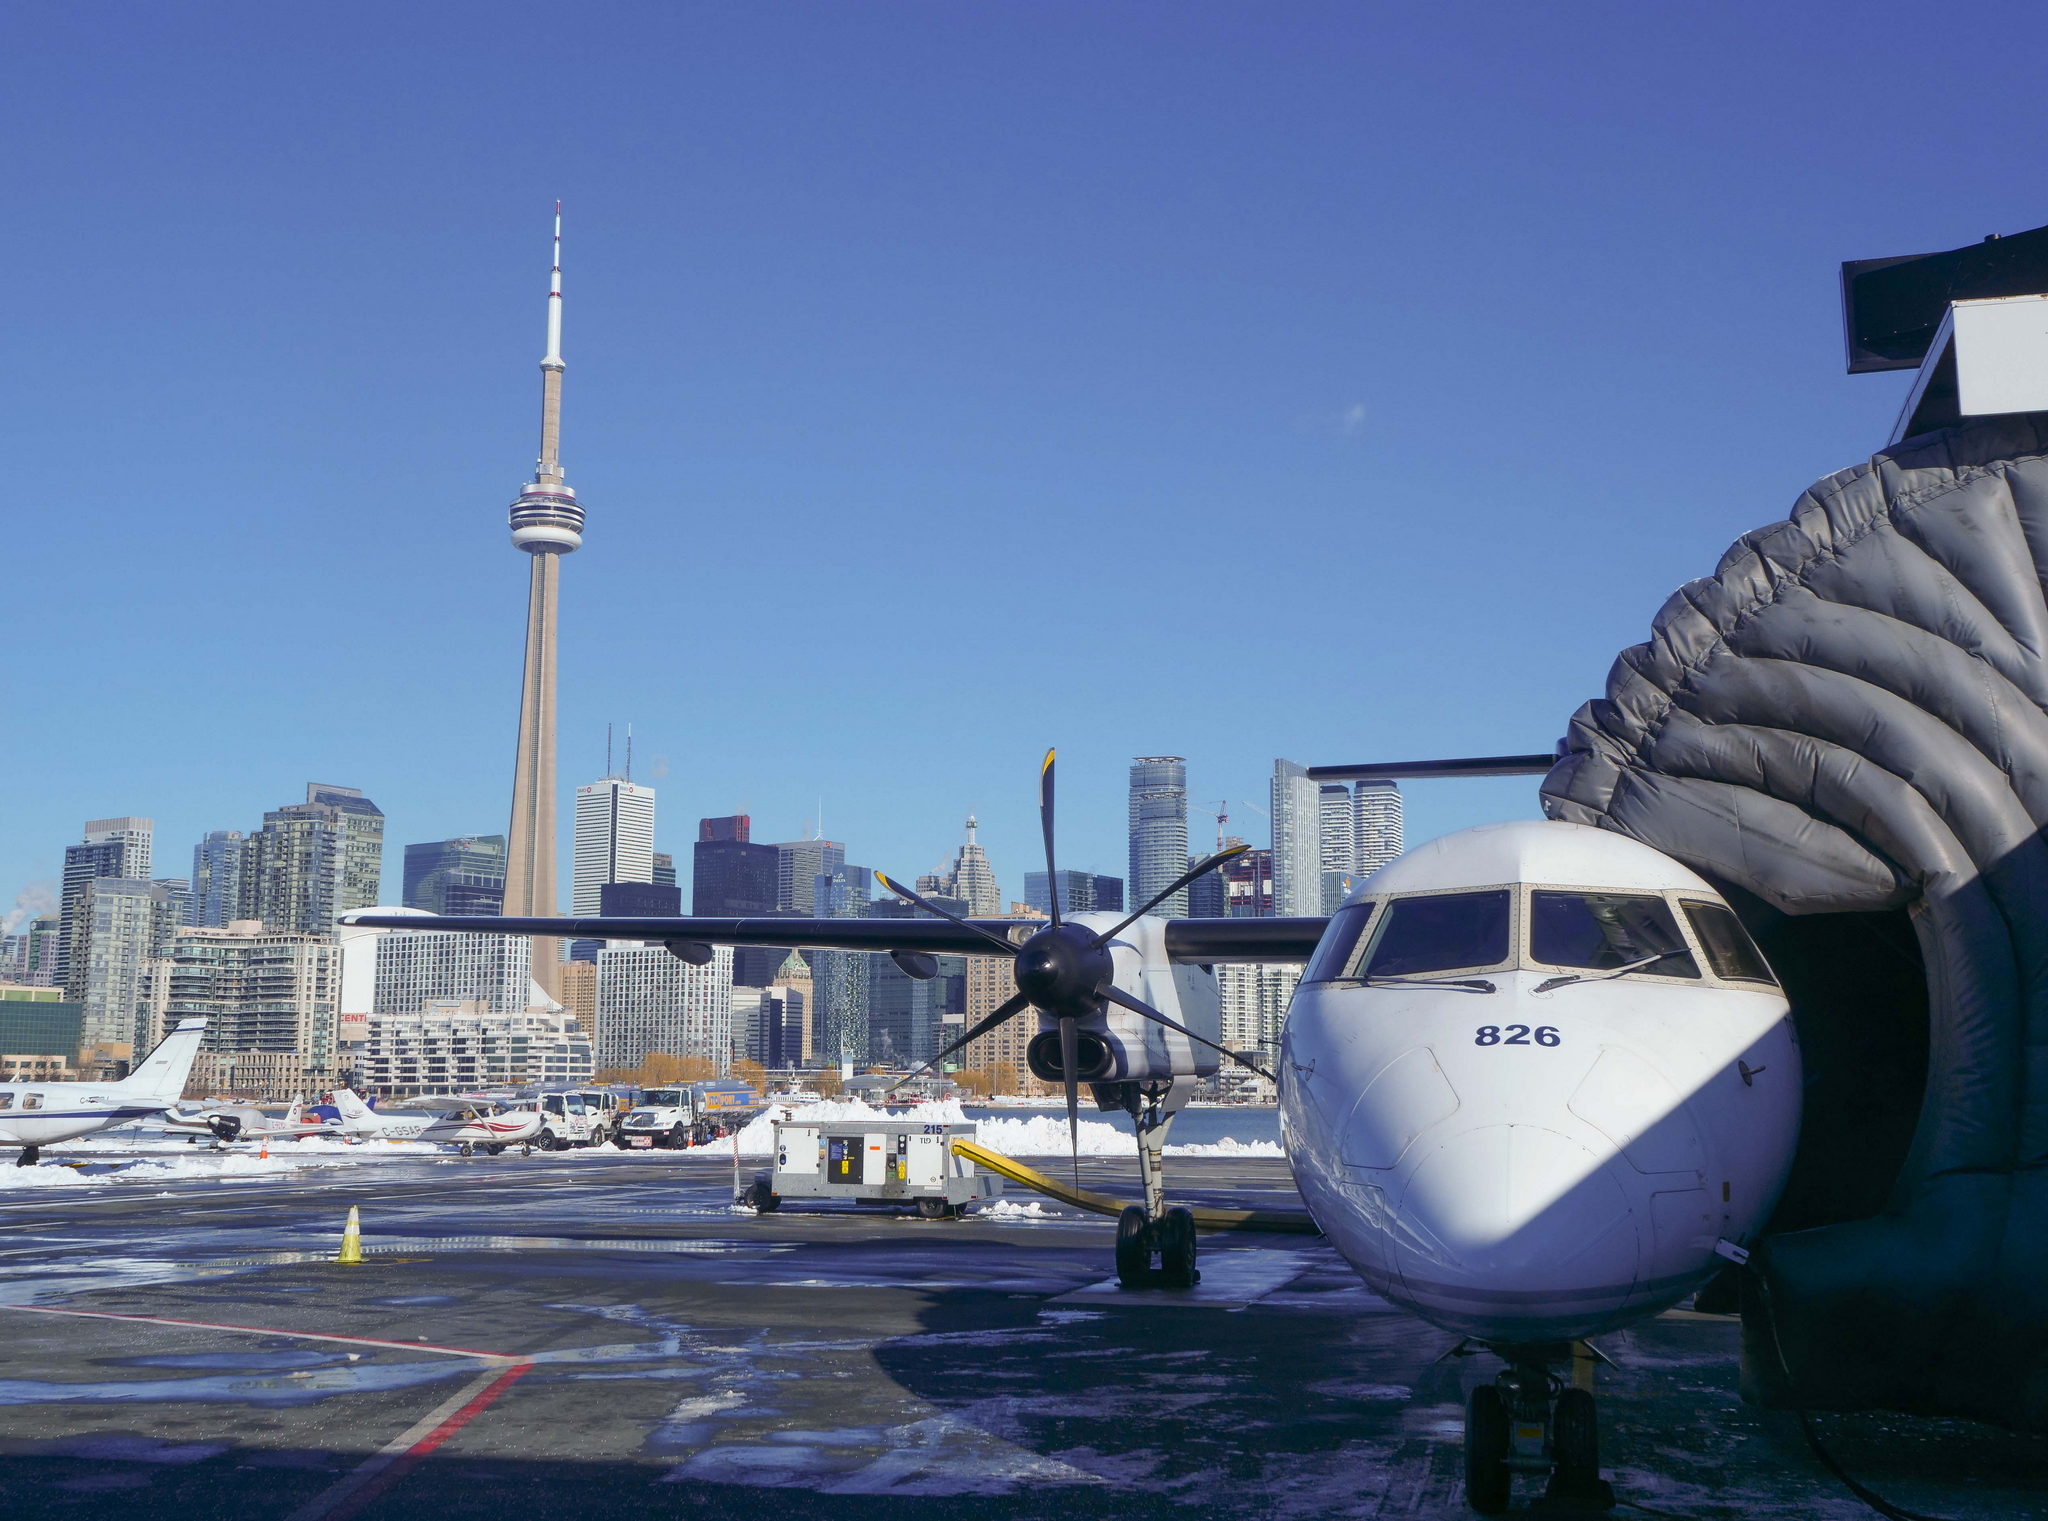 CN tower and airplane at Toronto City Airport